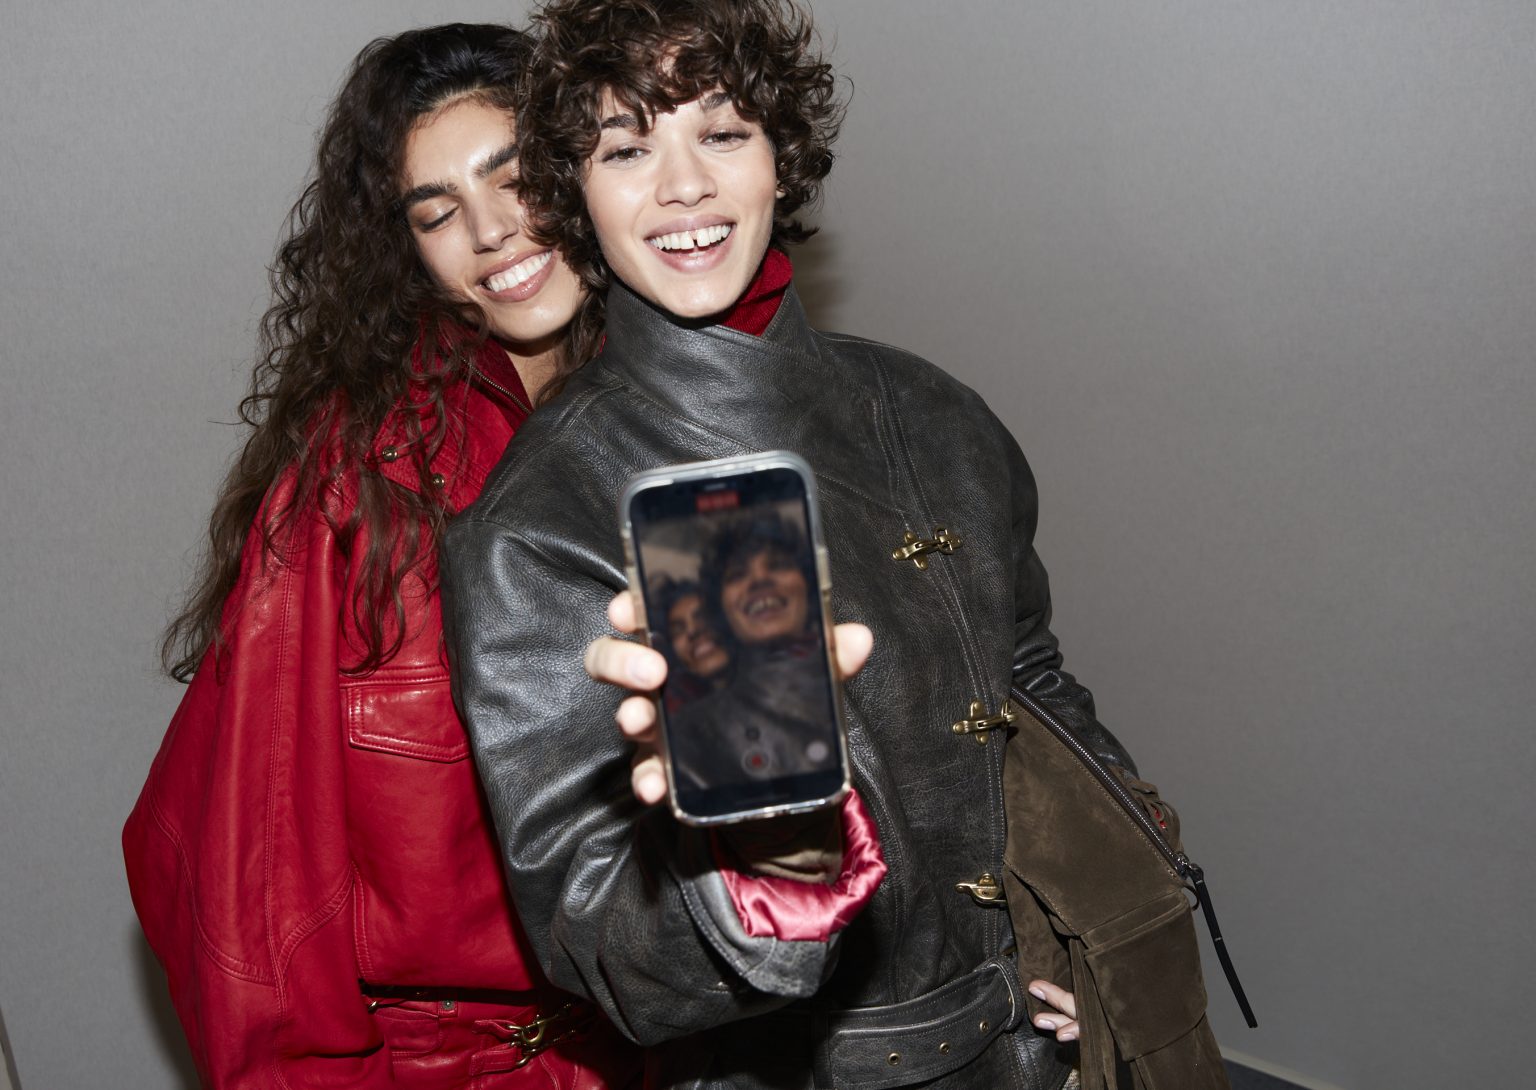 Two models smiling, one wearing a black leather jacket with clip fasteners, flashing a just-taken selfie. The other wears a red jacket. 